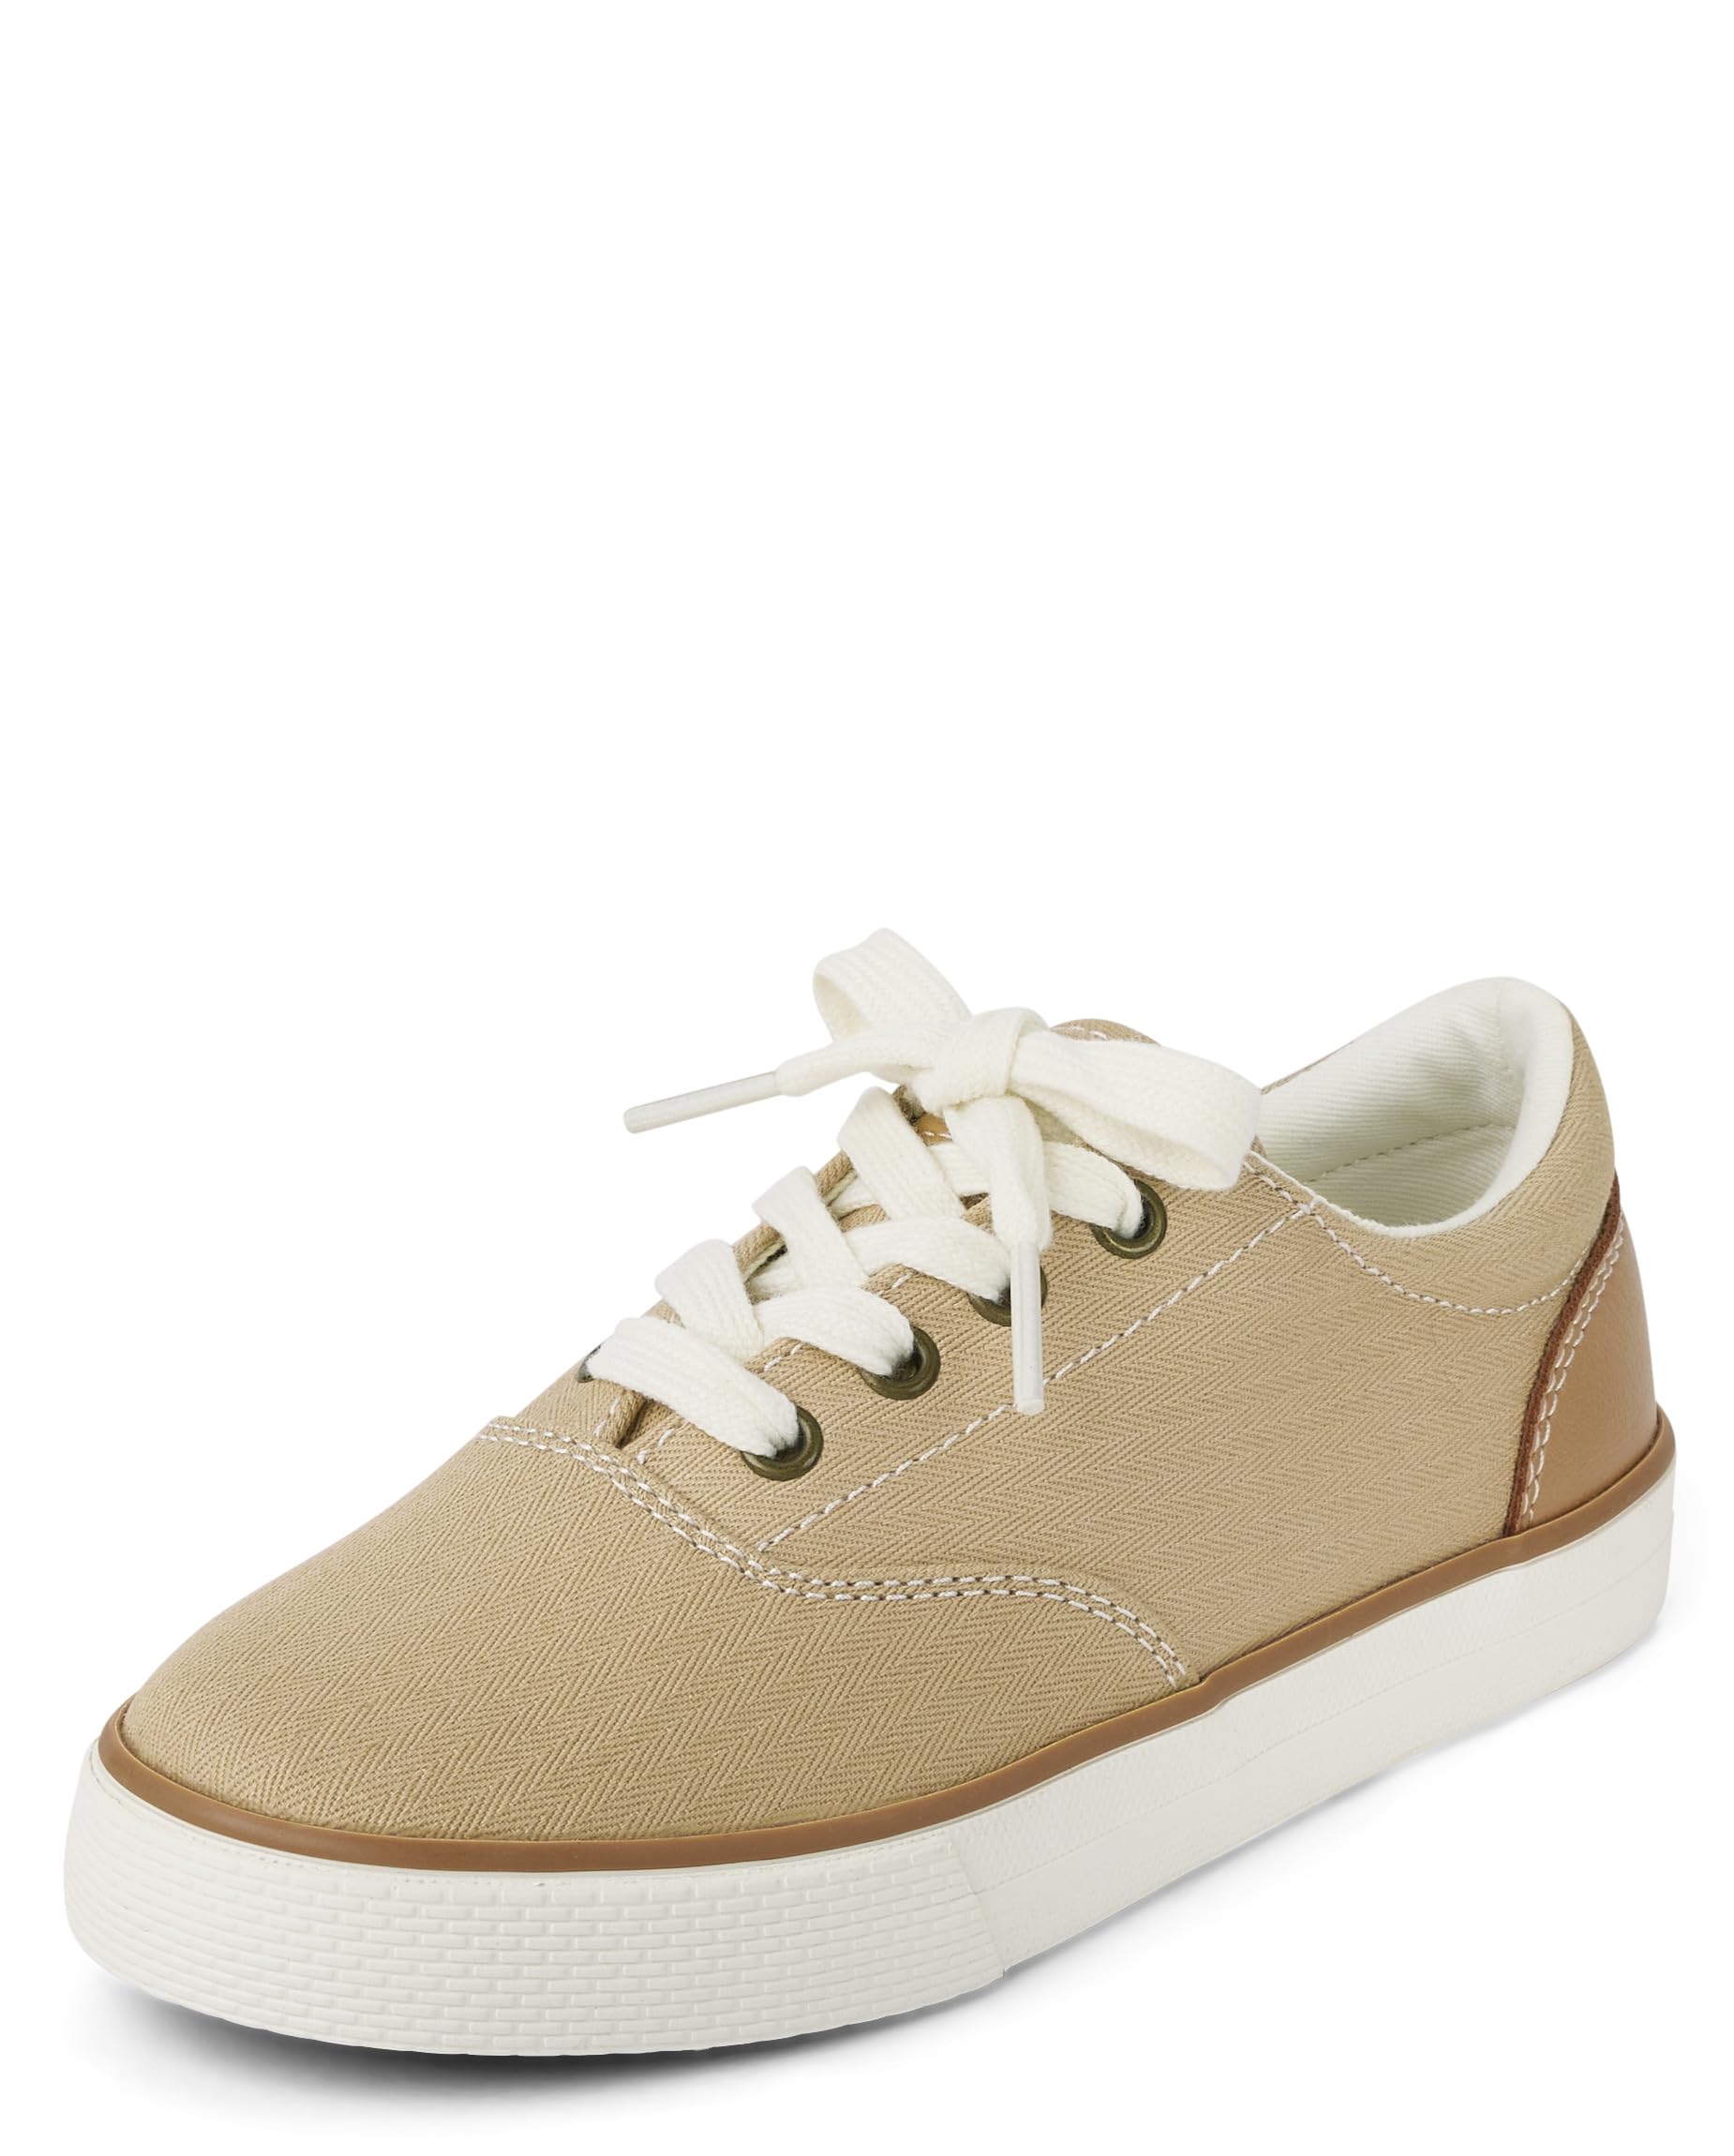 The Children's Place Boy's Casual Lace Up Low Top Sneakers